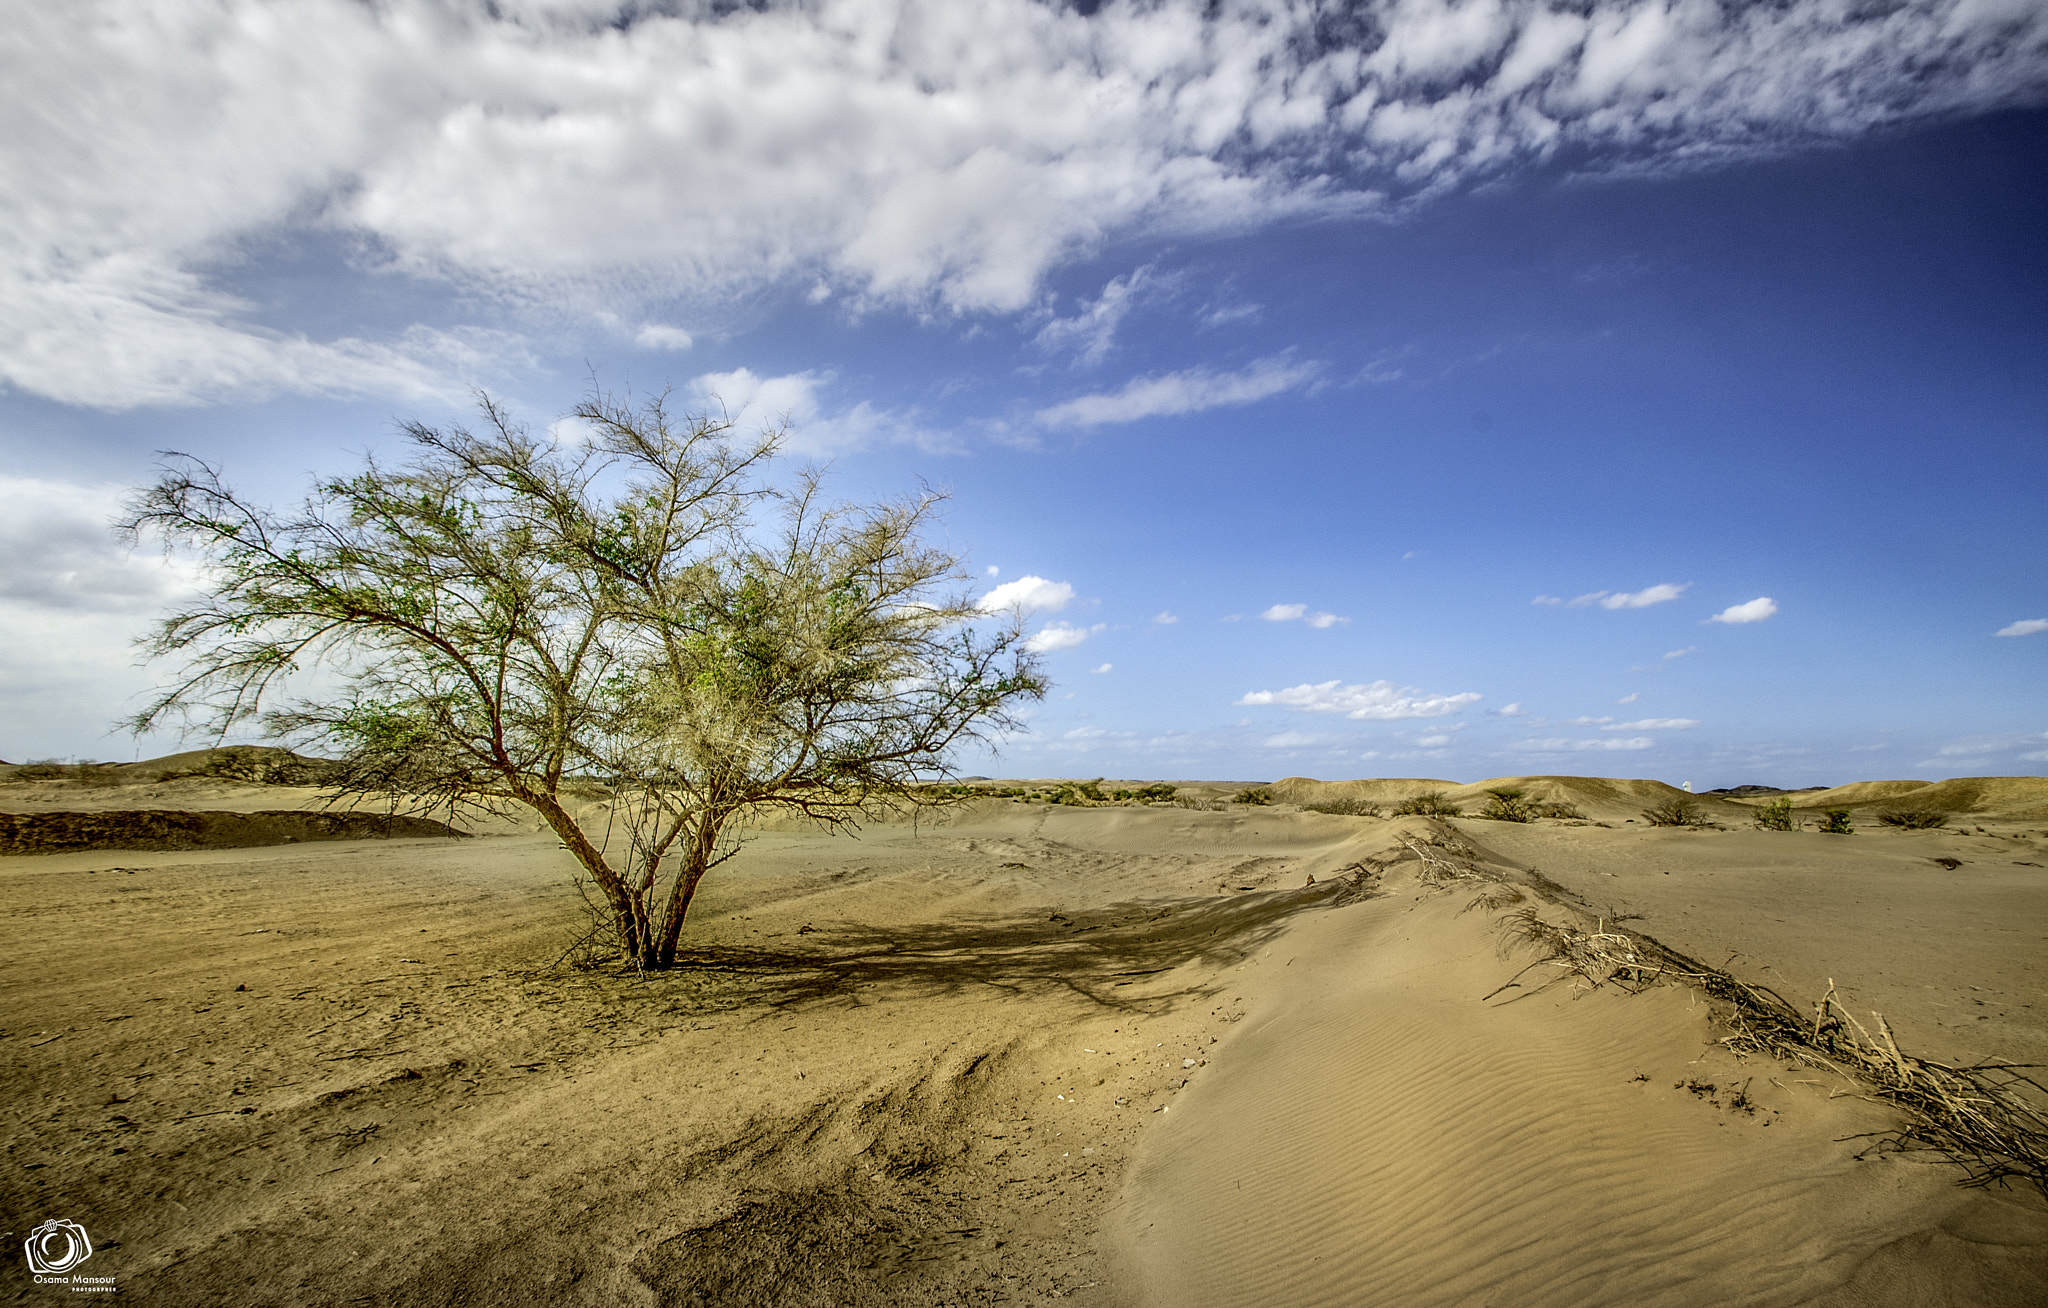 Nikon D610 + Tamron SP AF 10-24mm F3.5-4.5 Di II LD Aspherical (IF) sample photo. The desert is my love photography